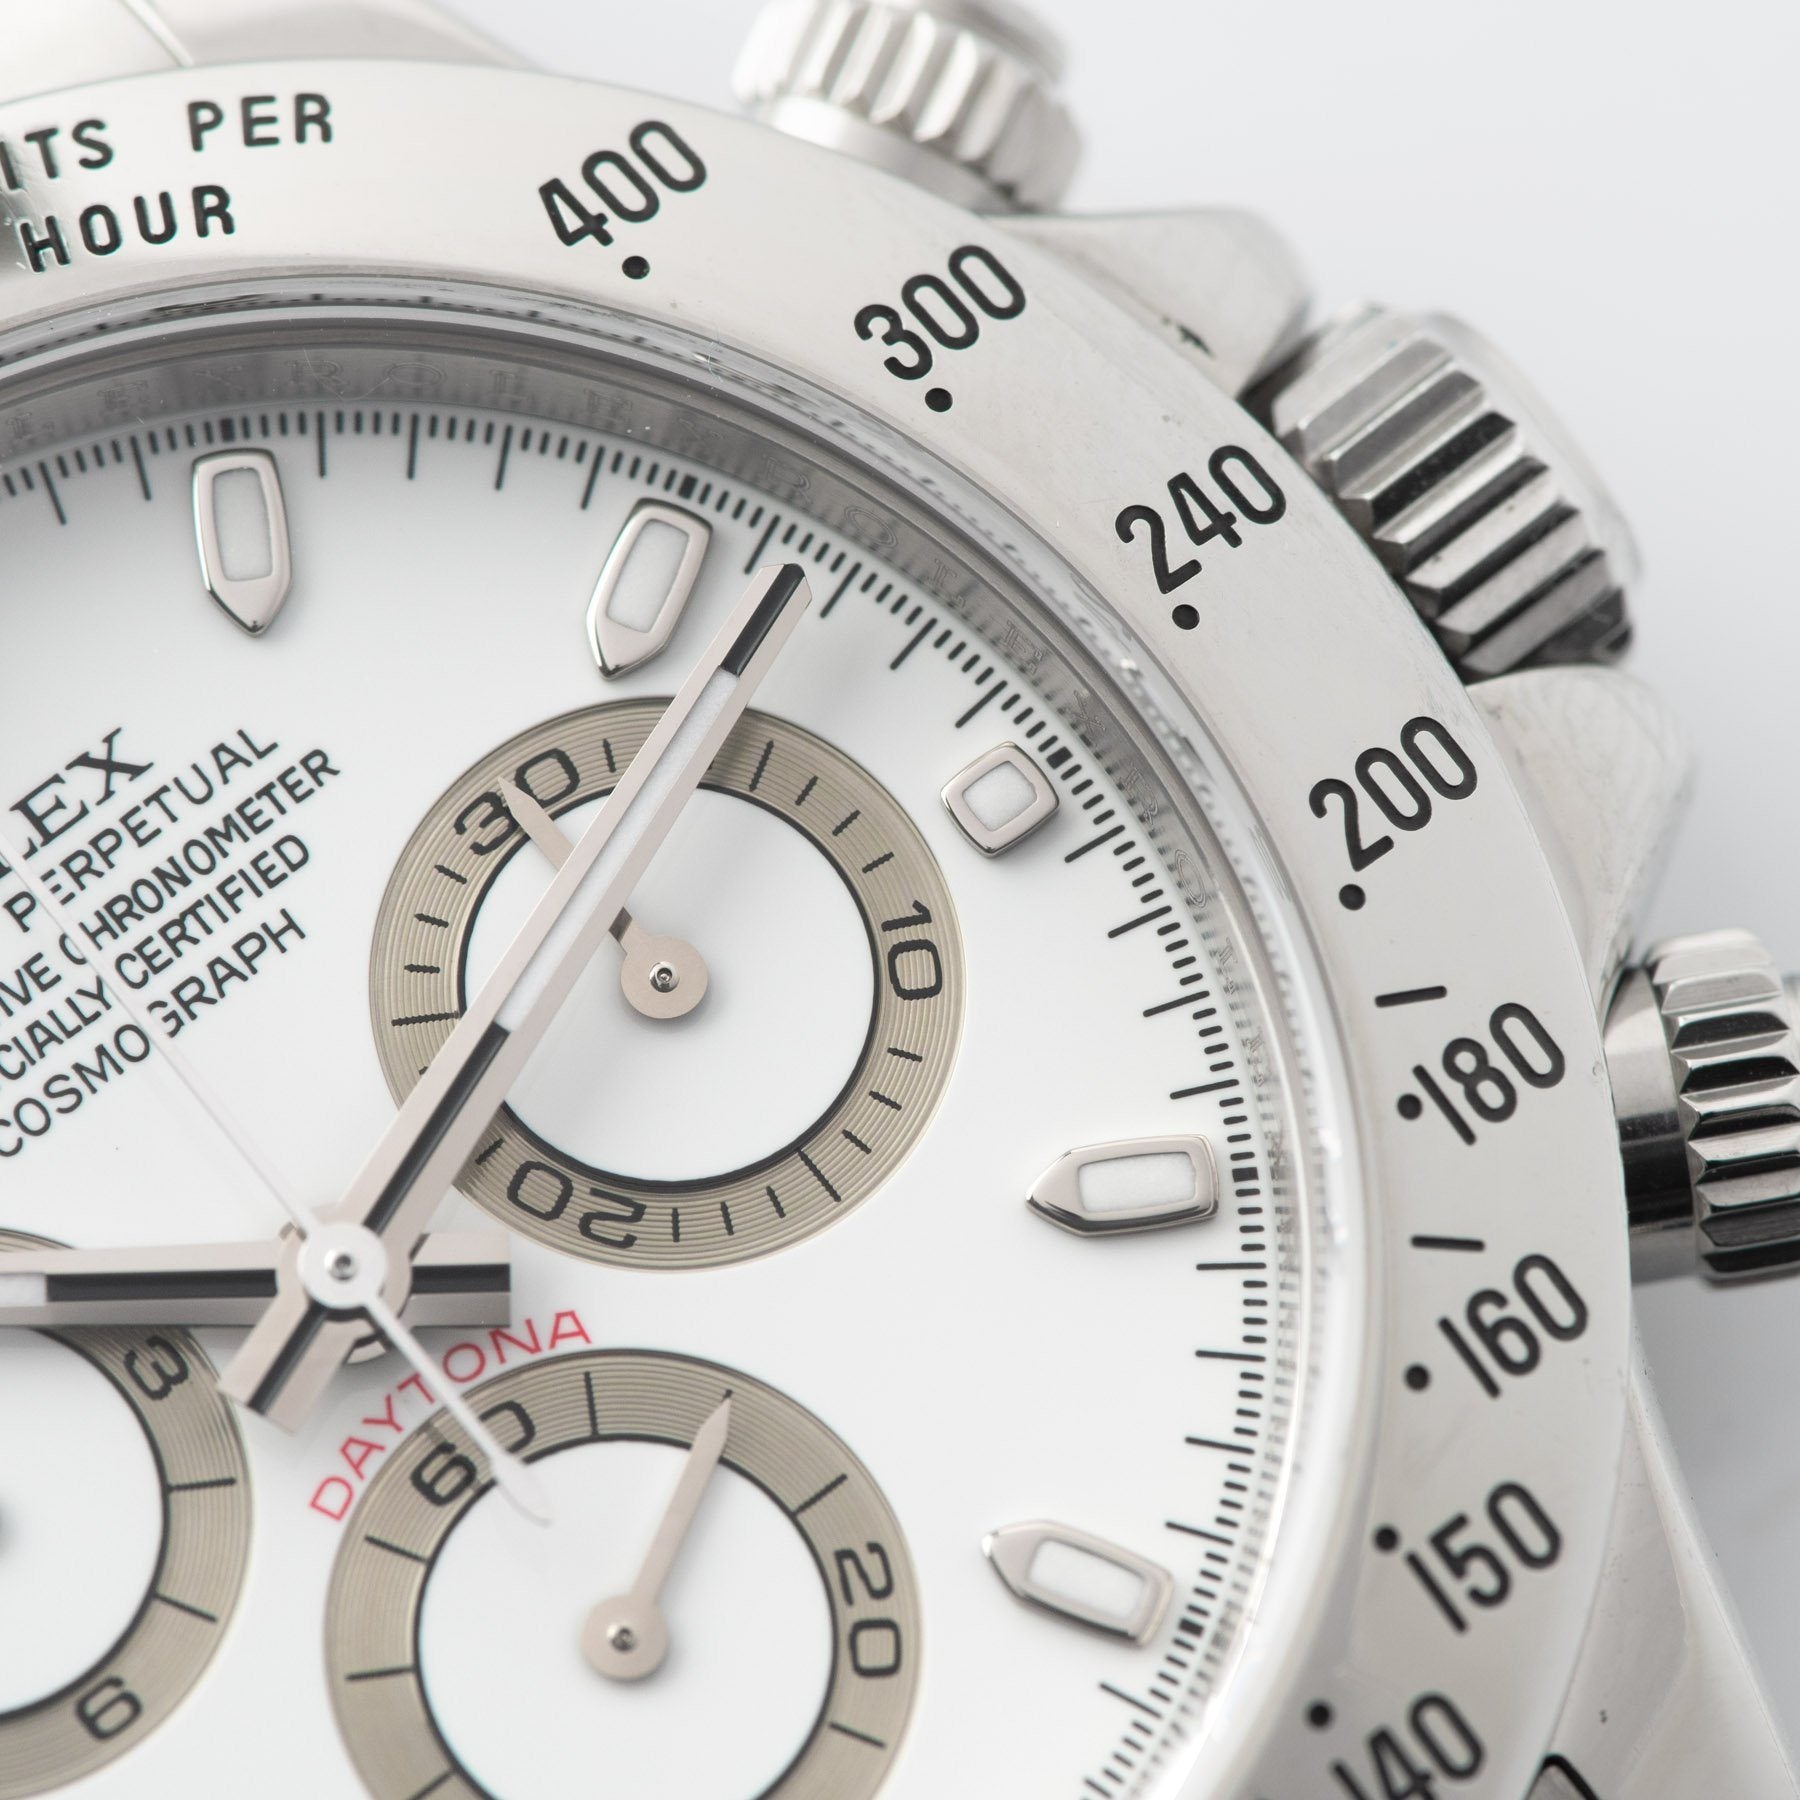 Rolex Daytona Steel 116520 White Dial with Guarantee and with a ceramic bezel